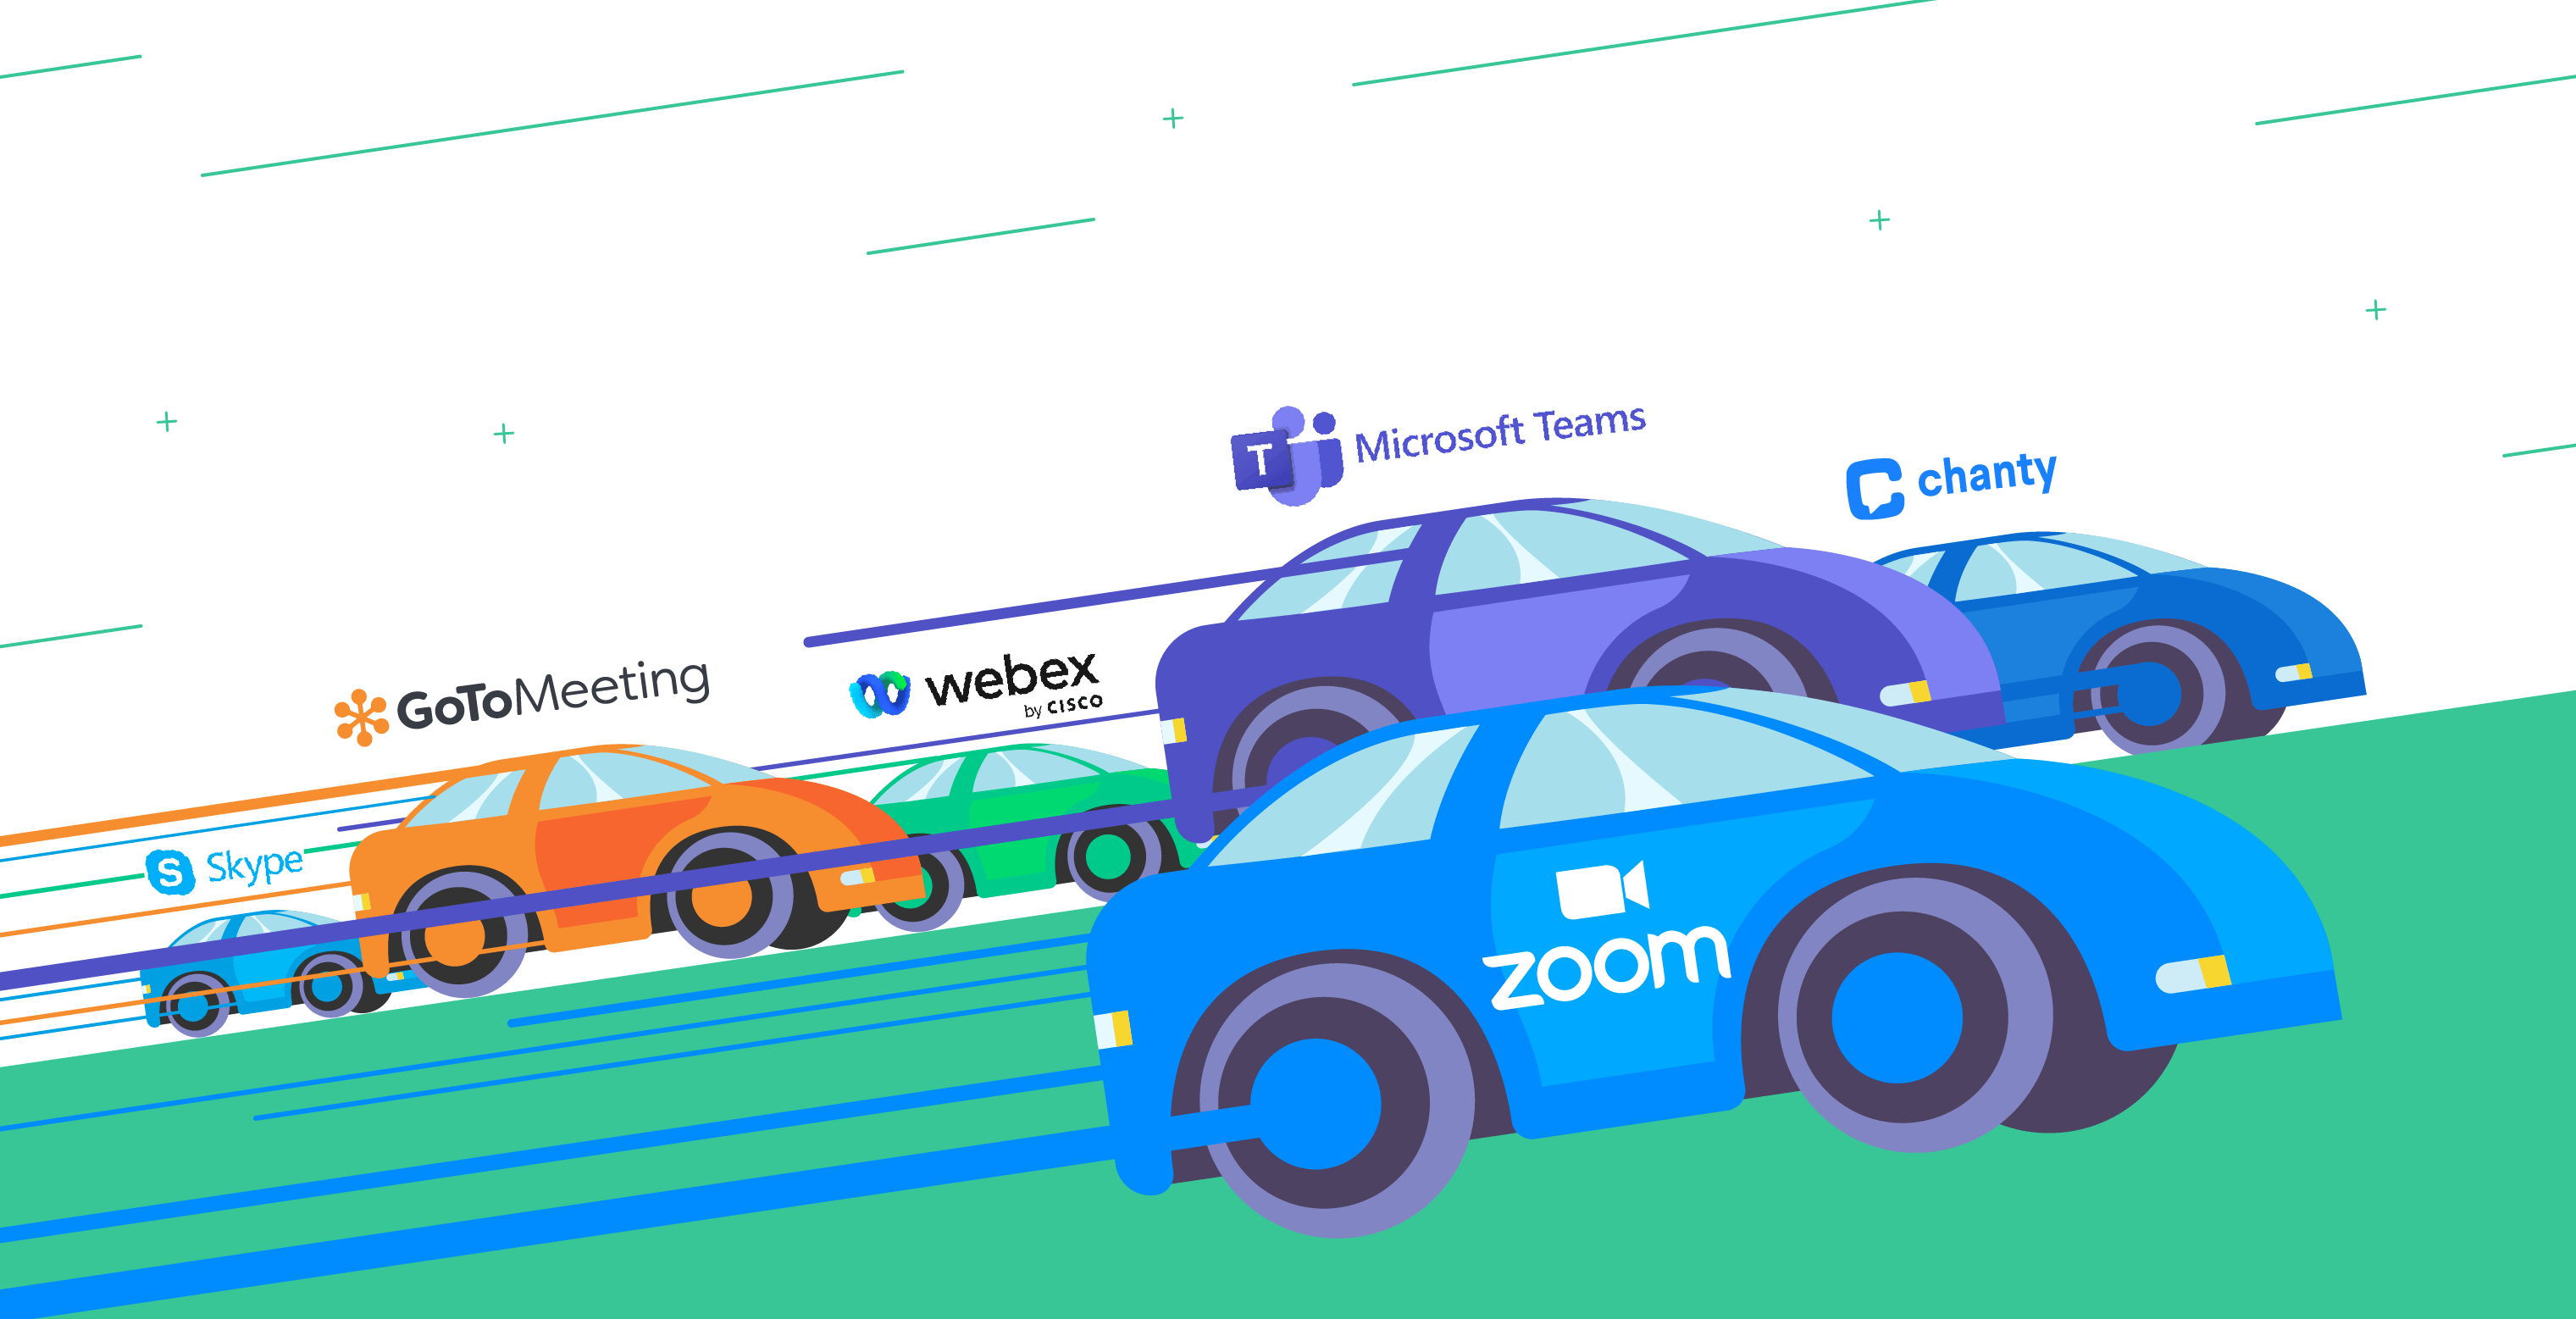 Zoom alternatives: Here are the 8 best ones to consider - Android Authority